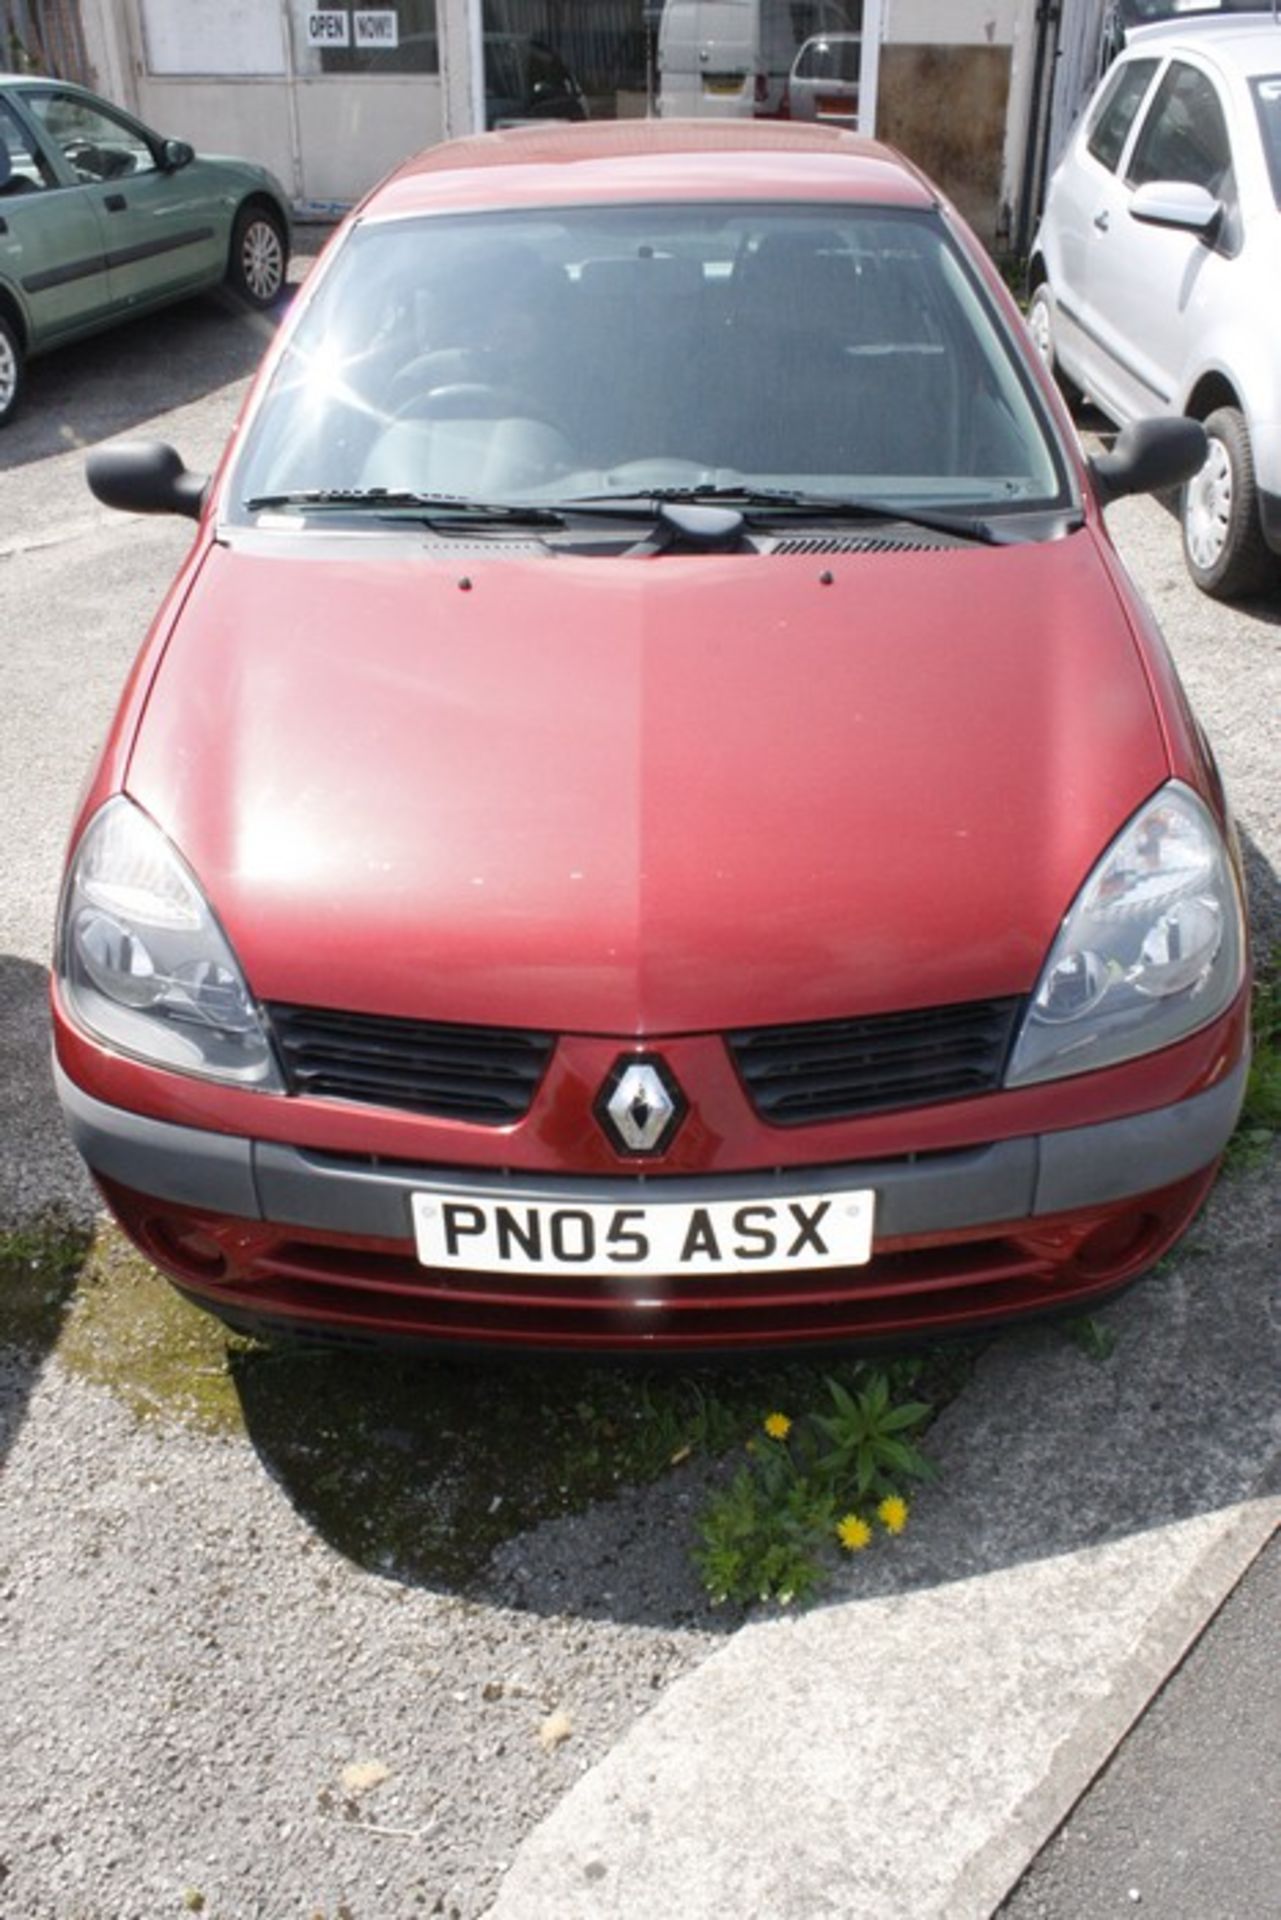 RENAULT CLIO EXPRESSION 1200CC, REGISTERED MARCH 2005, PN05 ASX, 12 MONTHS MOT, REMOTE CENTRAL - Image 2 of 11